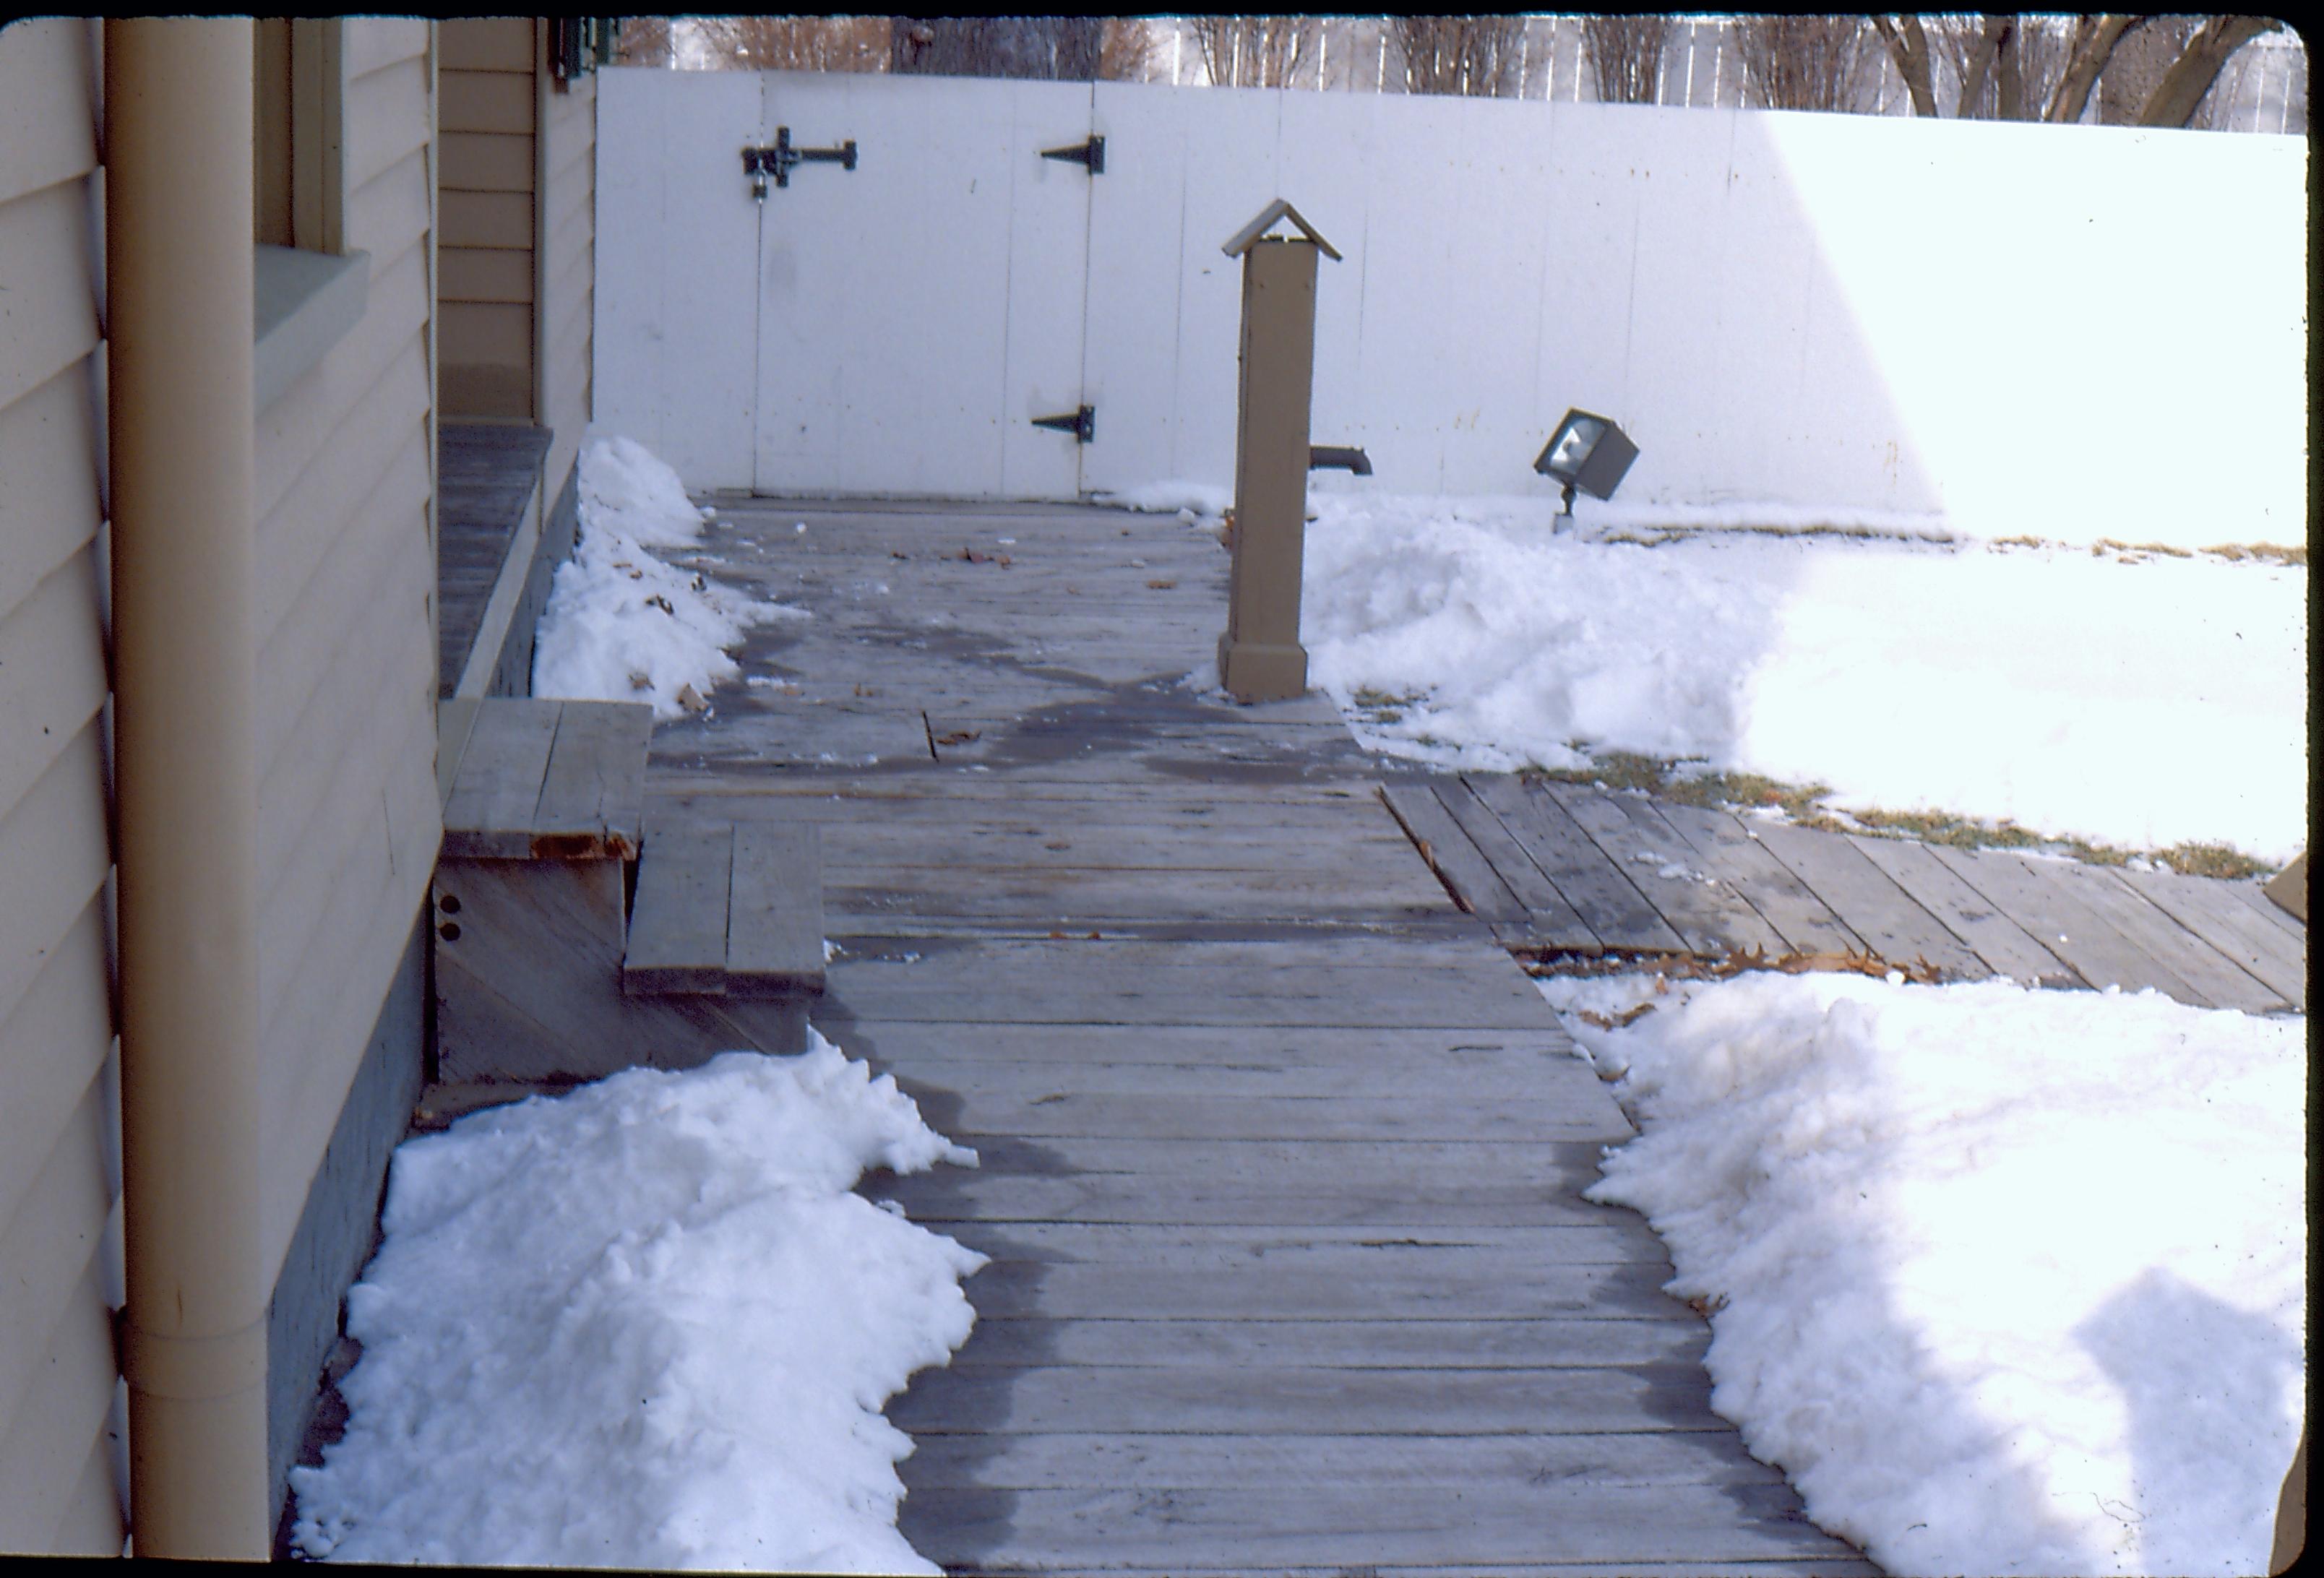 View of the Lincoln Home wheelchair lift, fully retracted without rails. Snow on ground. Photographer facing north.